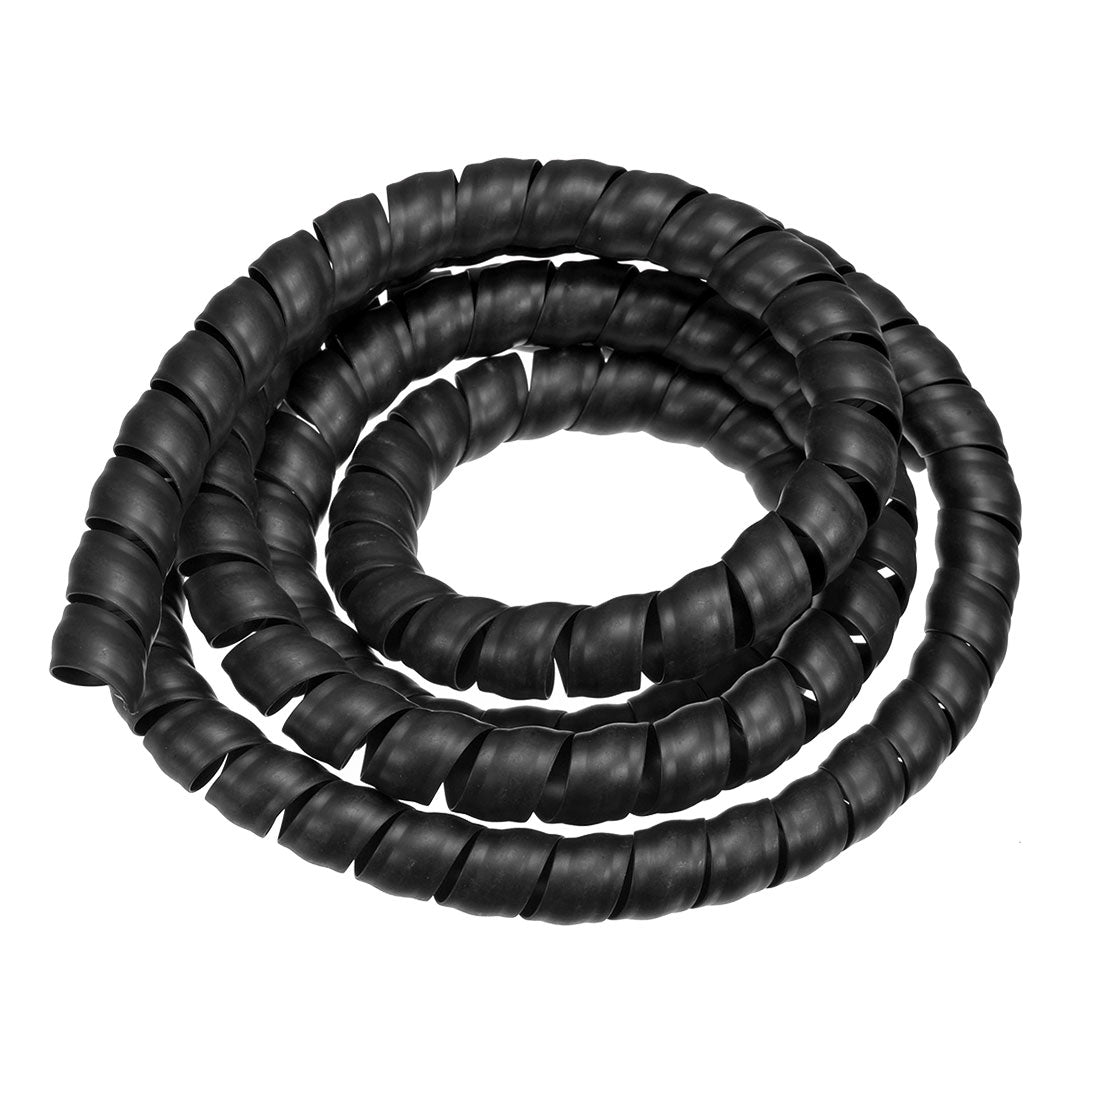 uxcell Uxcell Flexible Spiral Tube Wrap Cable Management Sleeve 20mm x 24mm Computer Wire Manage Cord 2 Meters Length Black